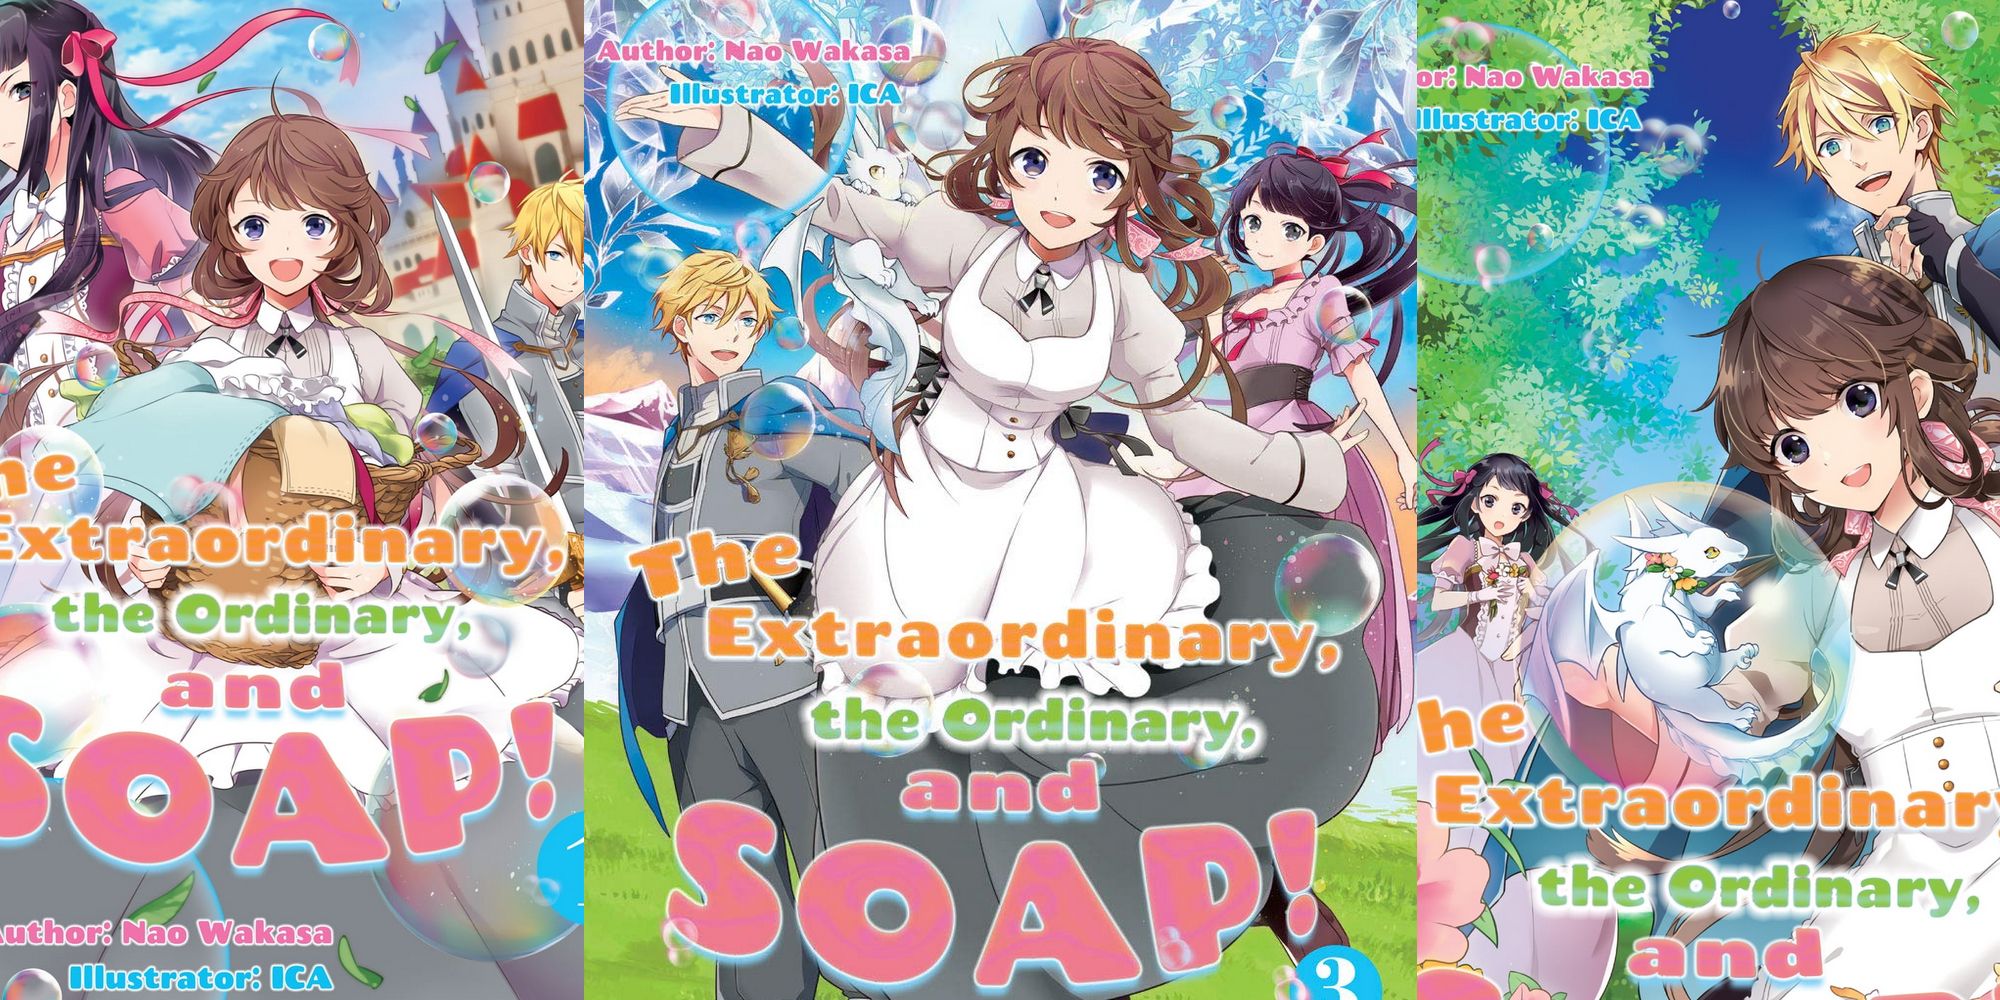 The Extraordinary the Ordinary and SOAP useless power becomes OP